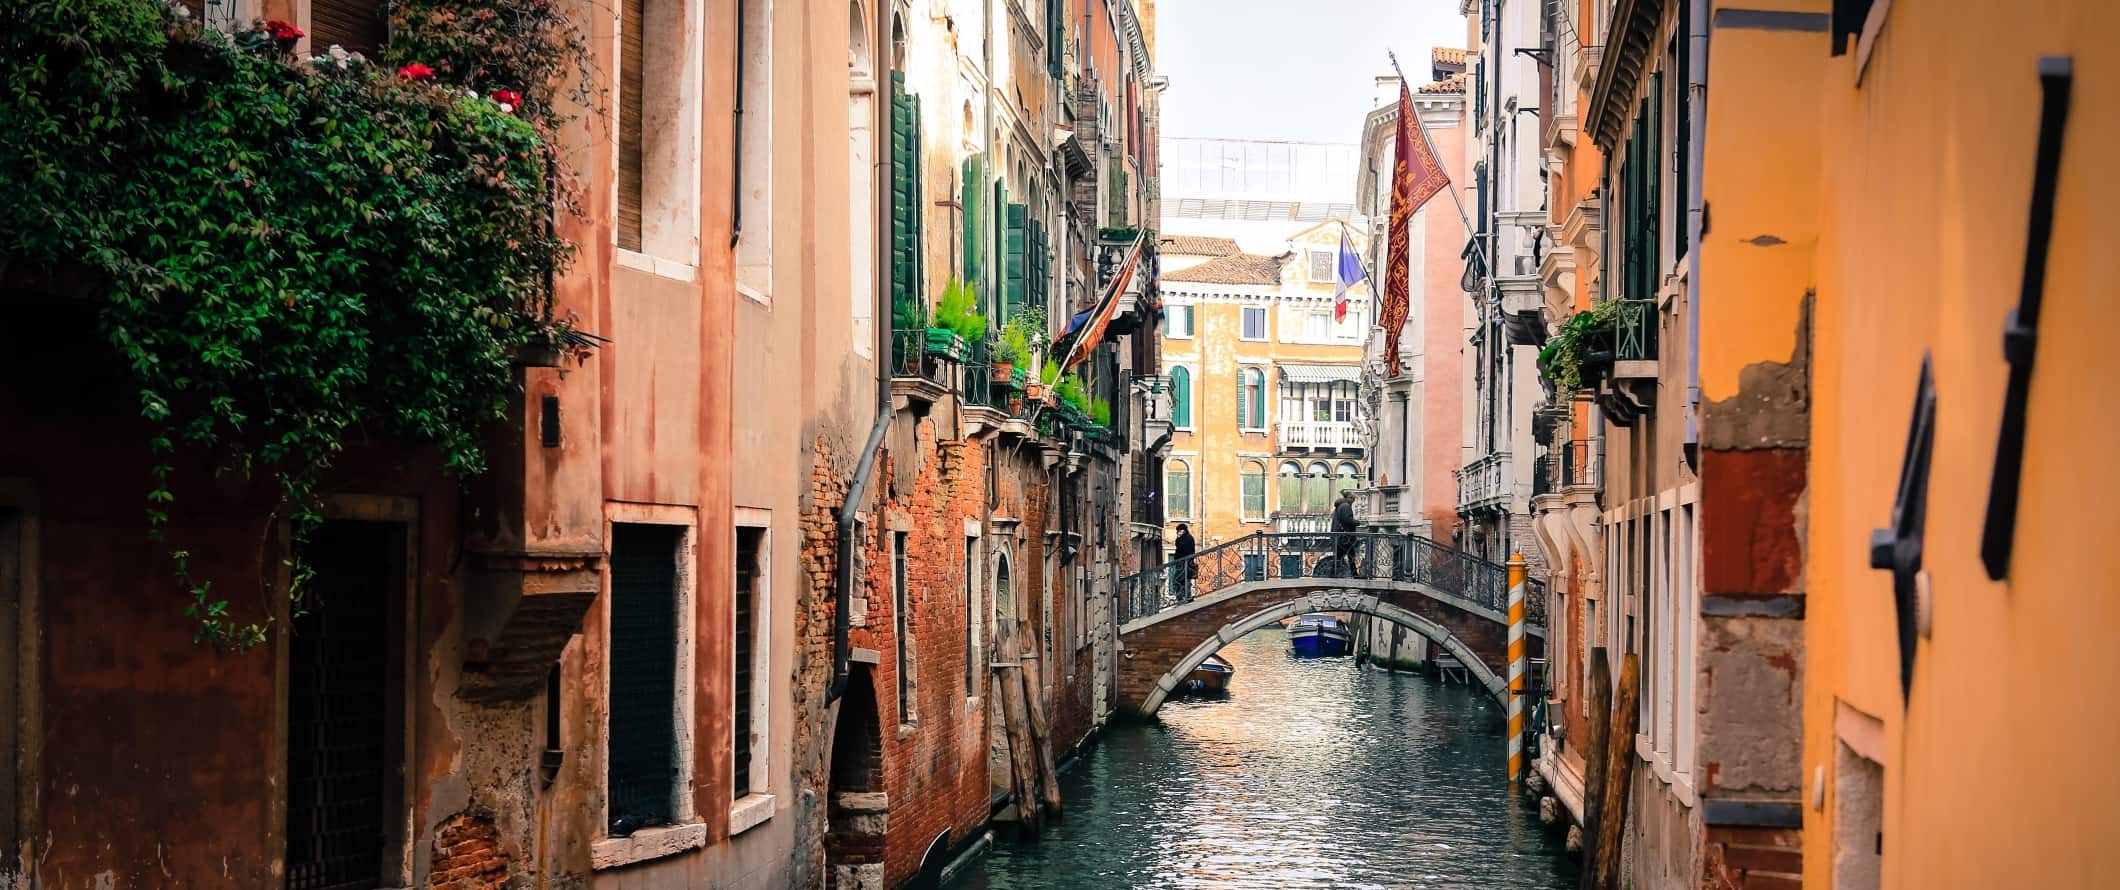 Closeup on colorful, historic homes lining a canal in Venice, Italy.